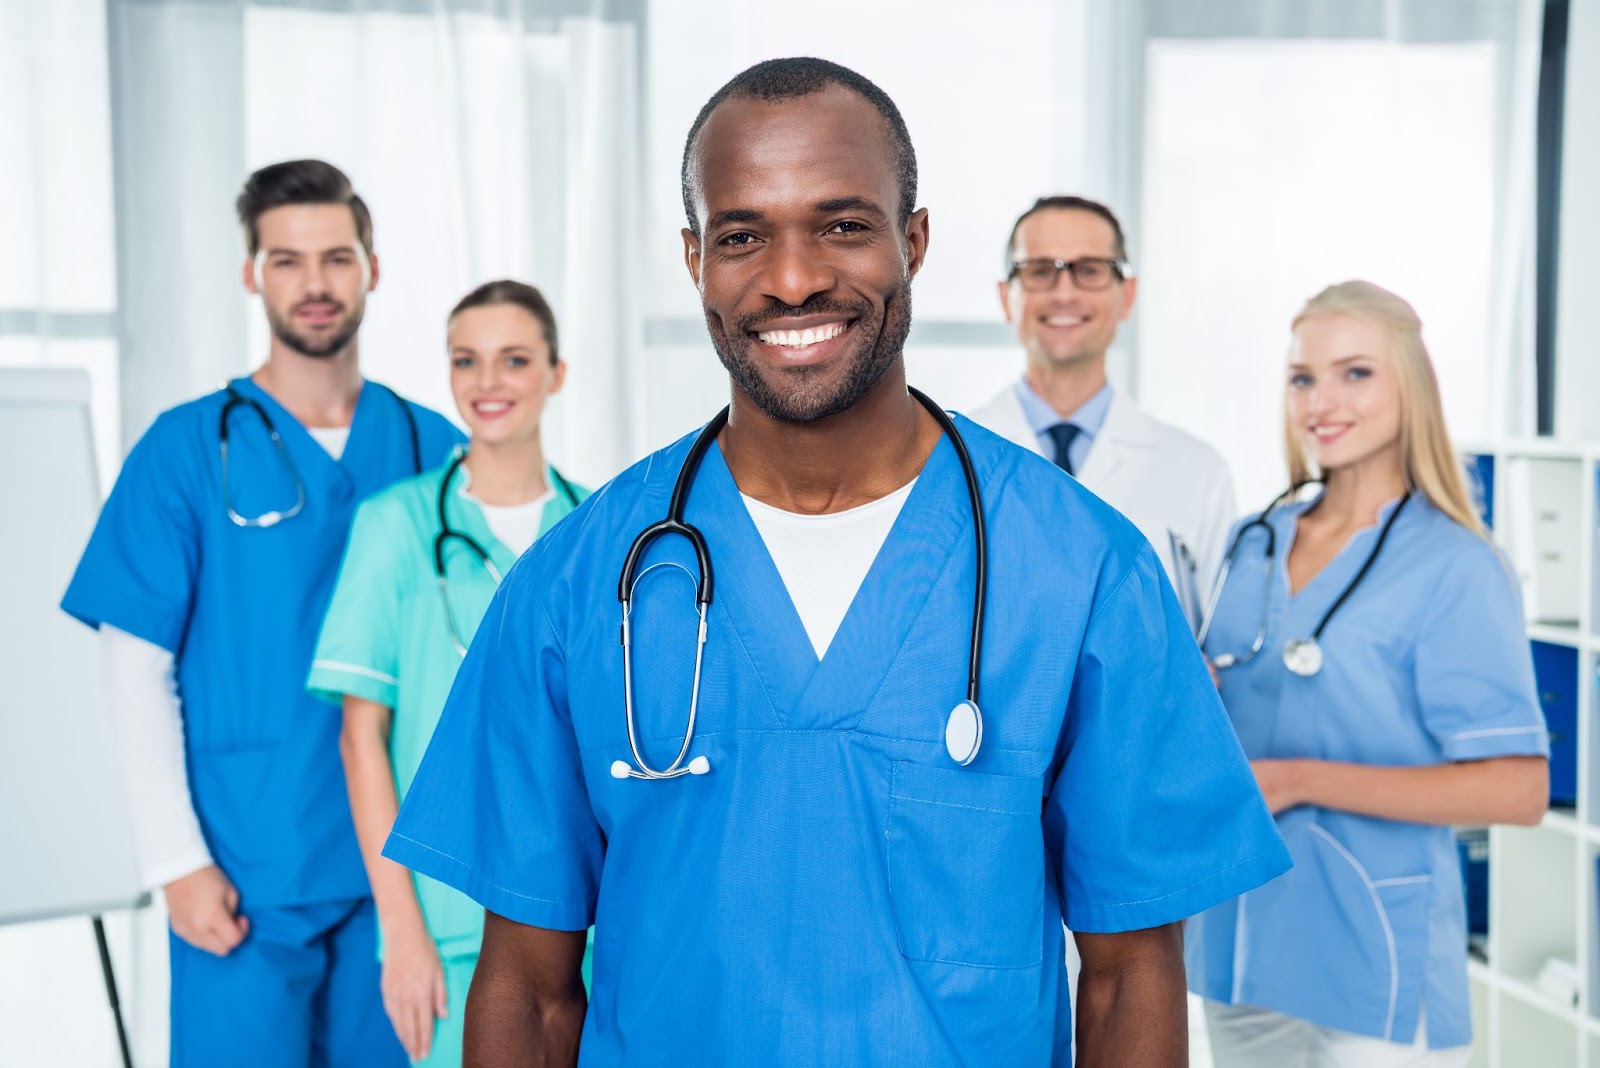 The 10 Best Employee Appreciation Gifts for Medical Staff